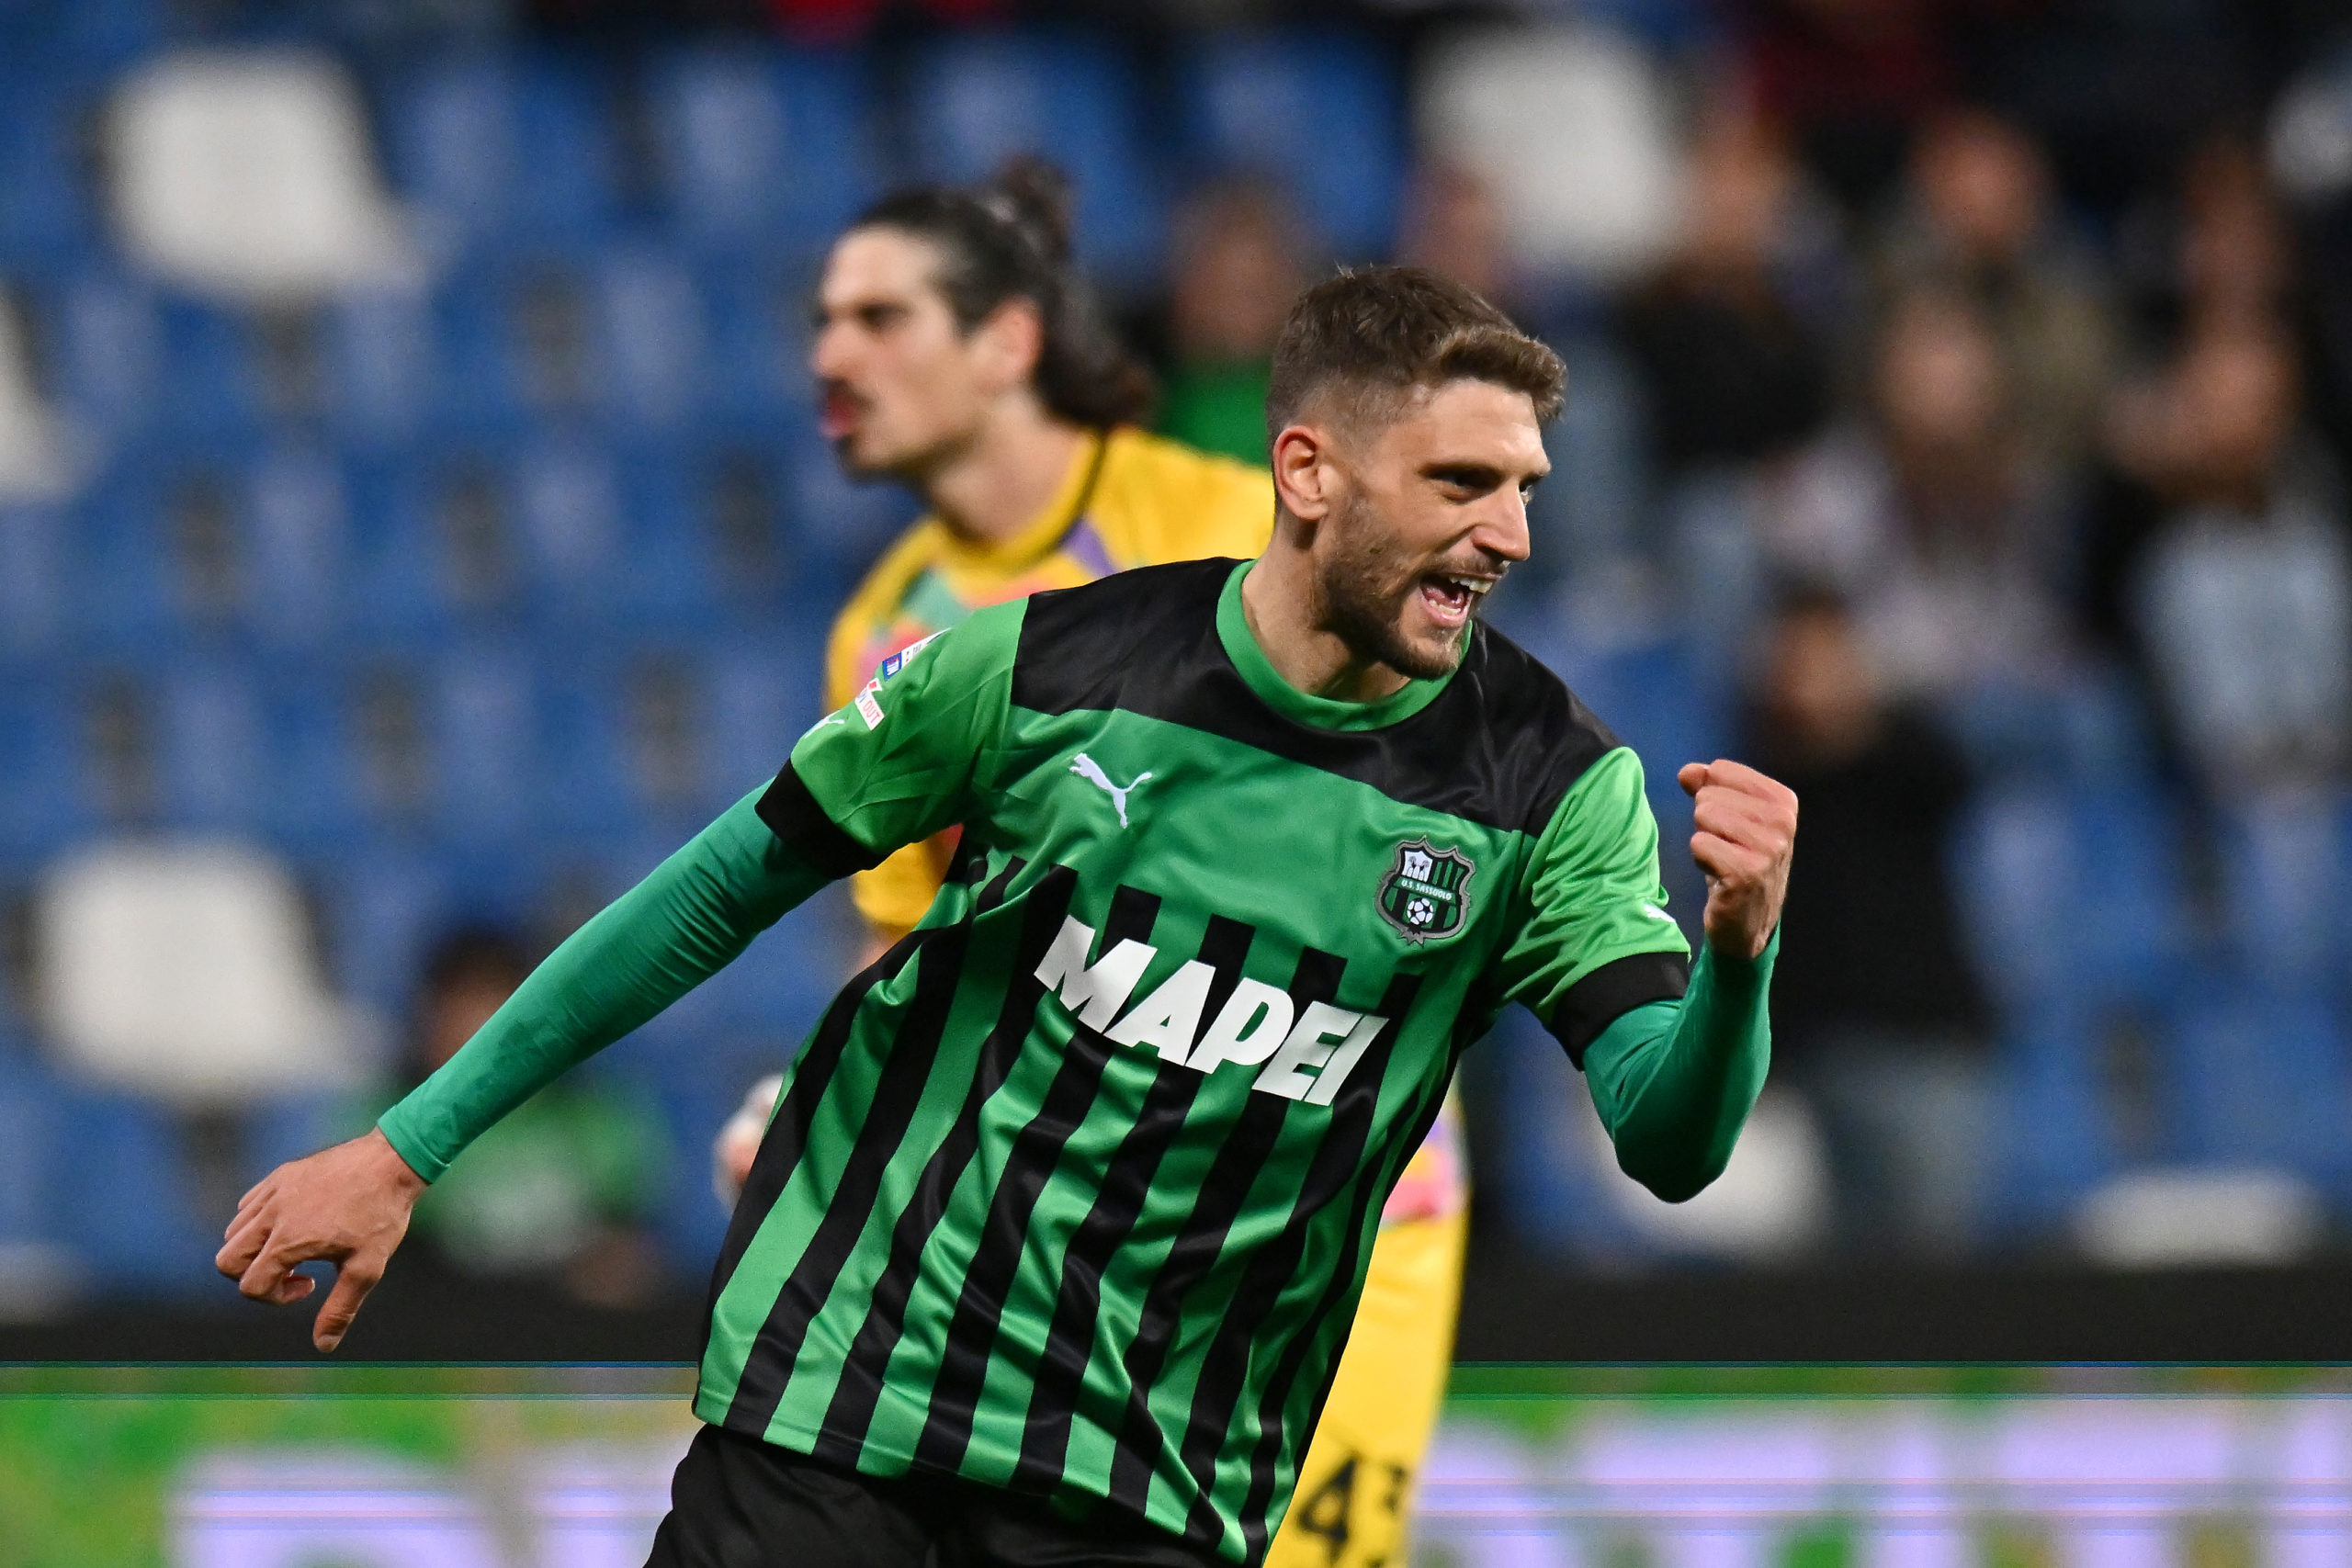 Lazio are targeting Domenico Berardi but, as has happened in previous windows, the price tag established by Sassuolo is lofty.